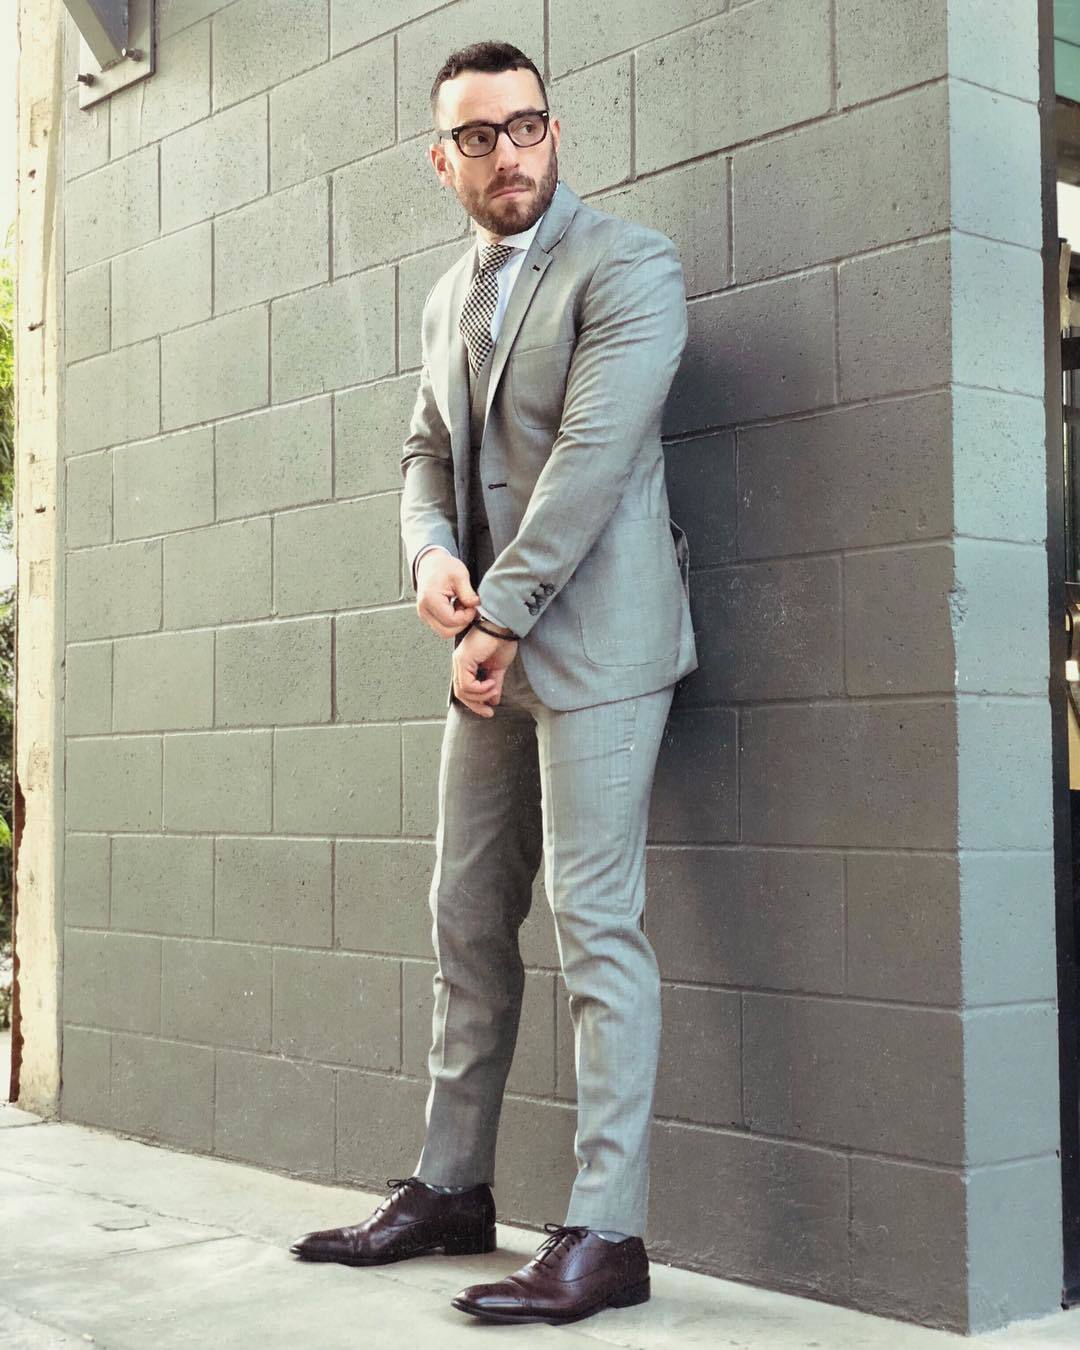 Gray three-piece suit, white dress shirt, and burgundy oxford shoes